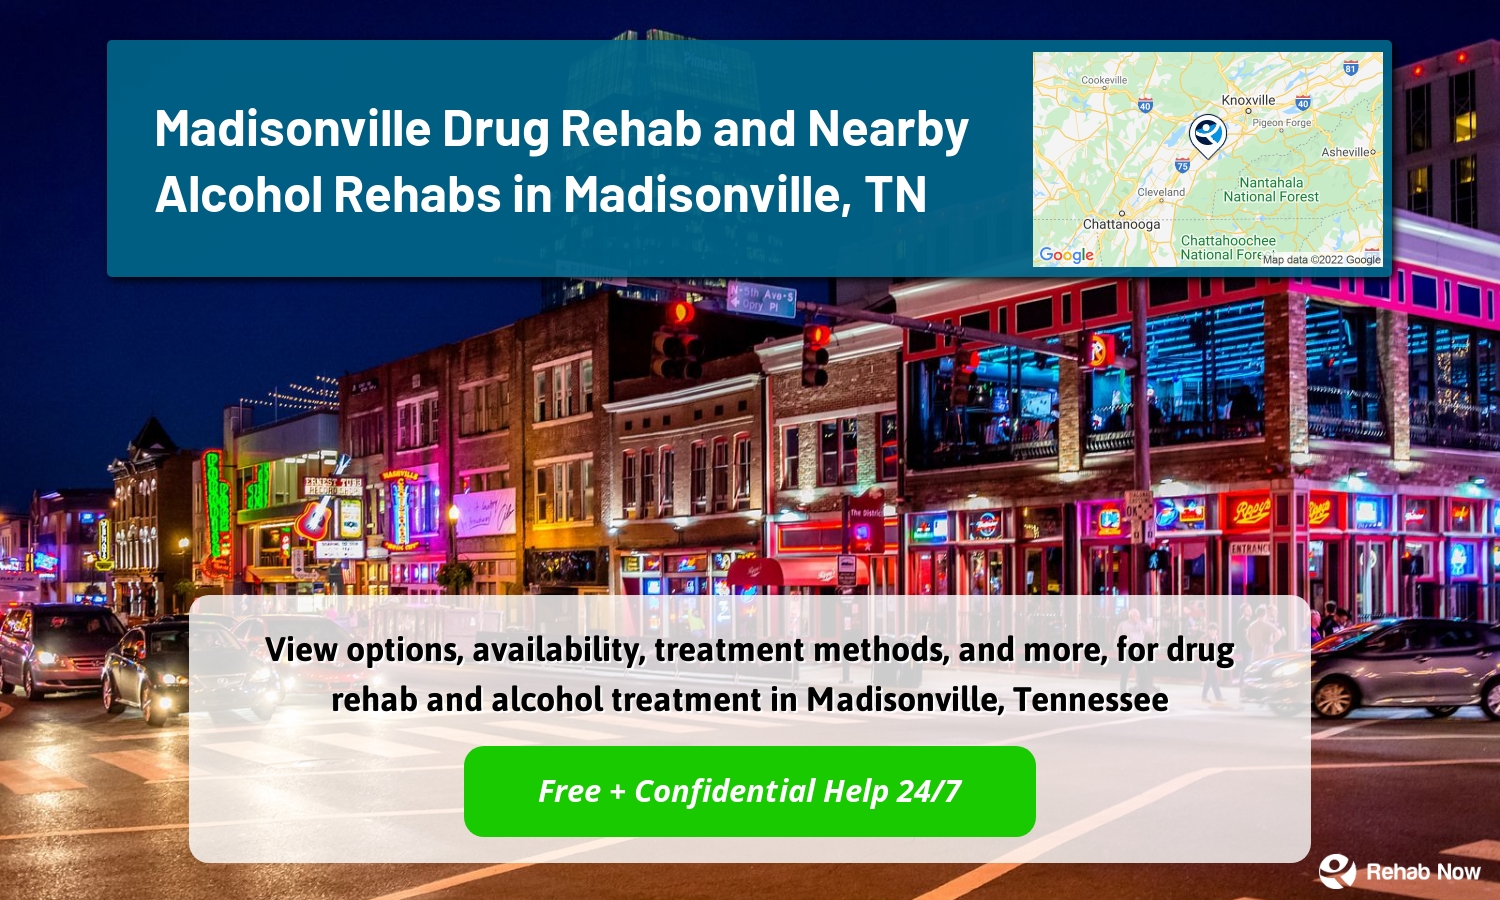 View options, availability, treatment methods, and more, for drug rehab and alcohol treatment in Madisonville, Tennessee